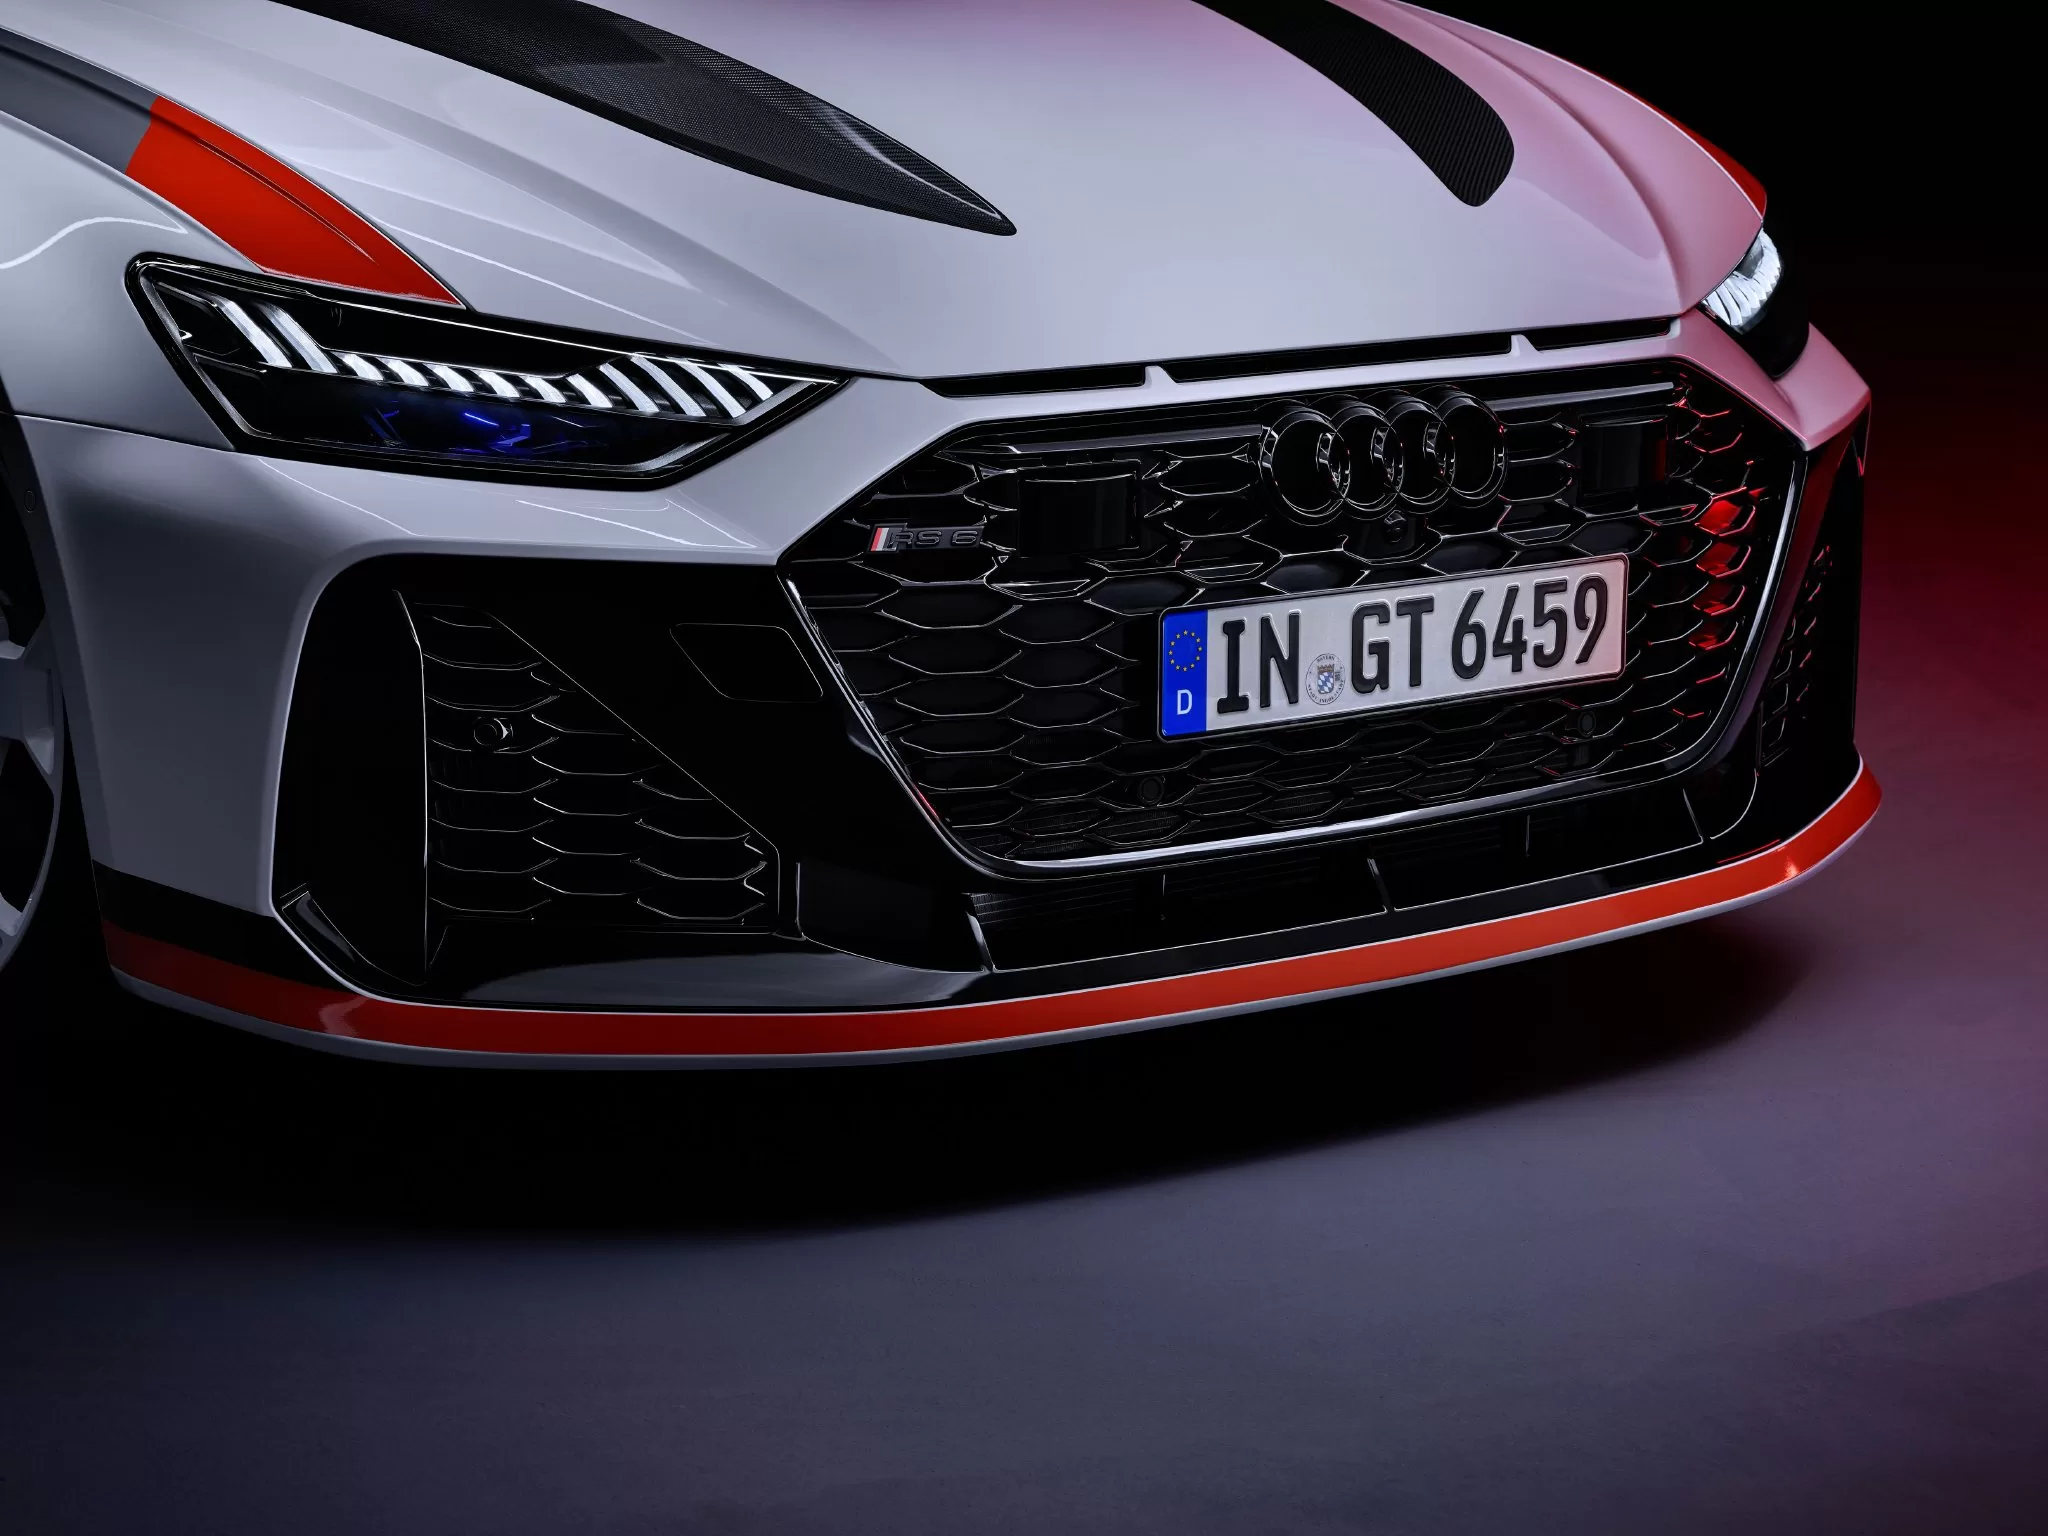 Audi RS 6 Avant GT: Limited Edition Flagship with Unique Design and Performance